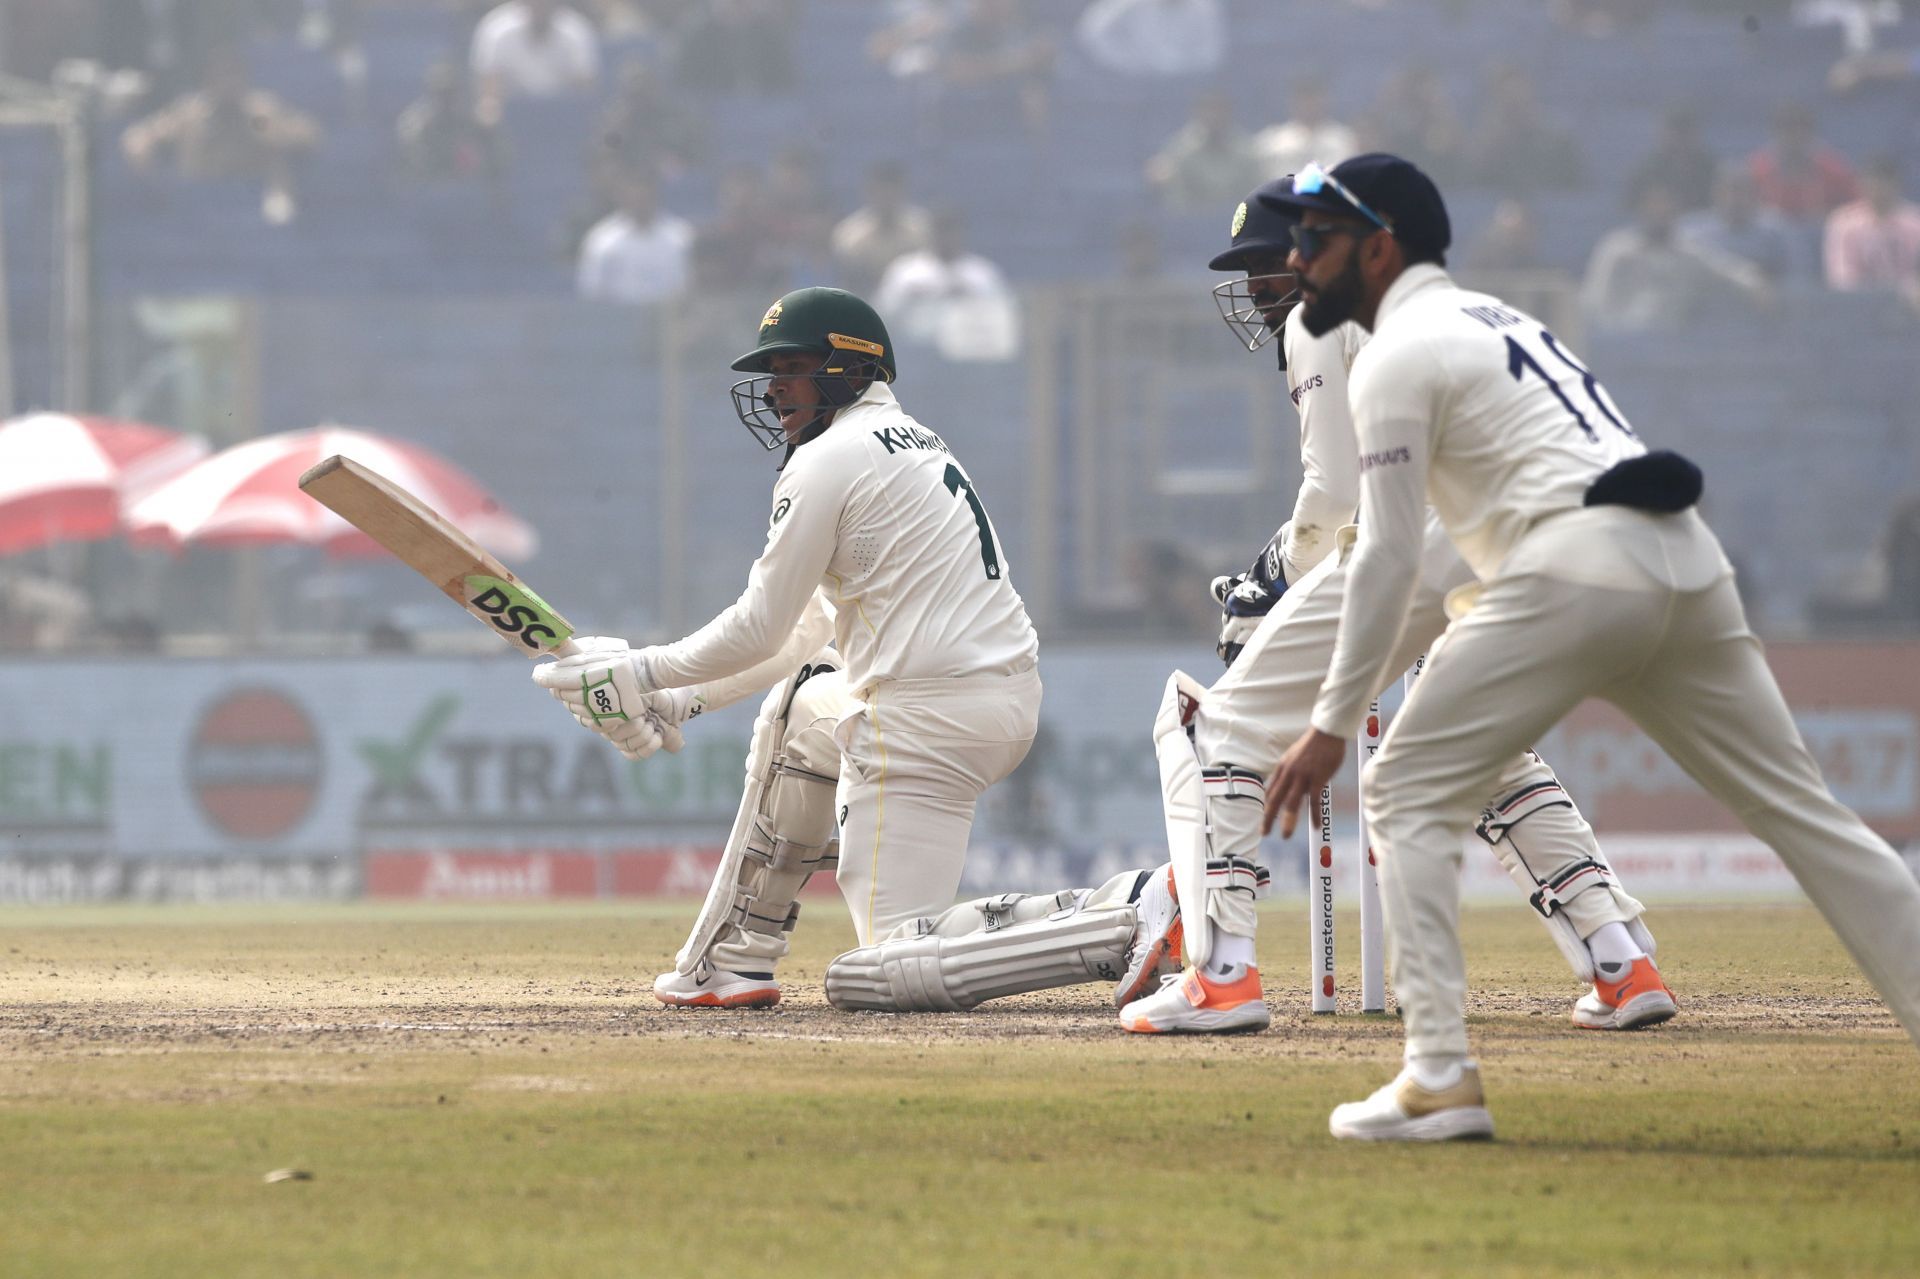 Usman Khawaja batted with intent. (Image Credits: Getty)